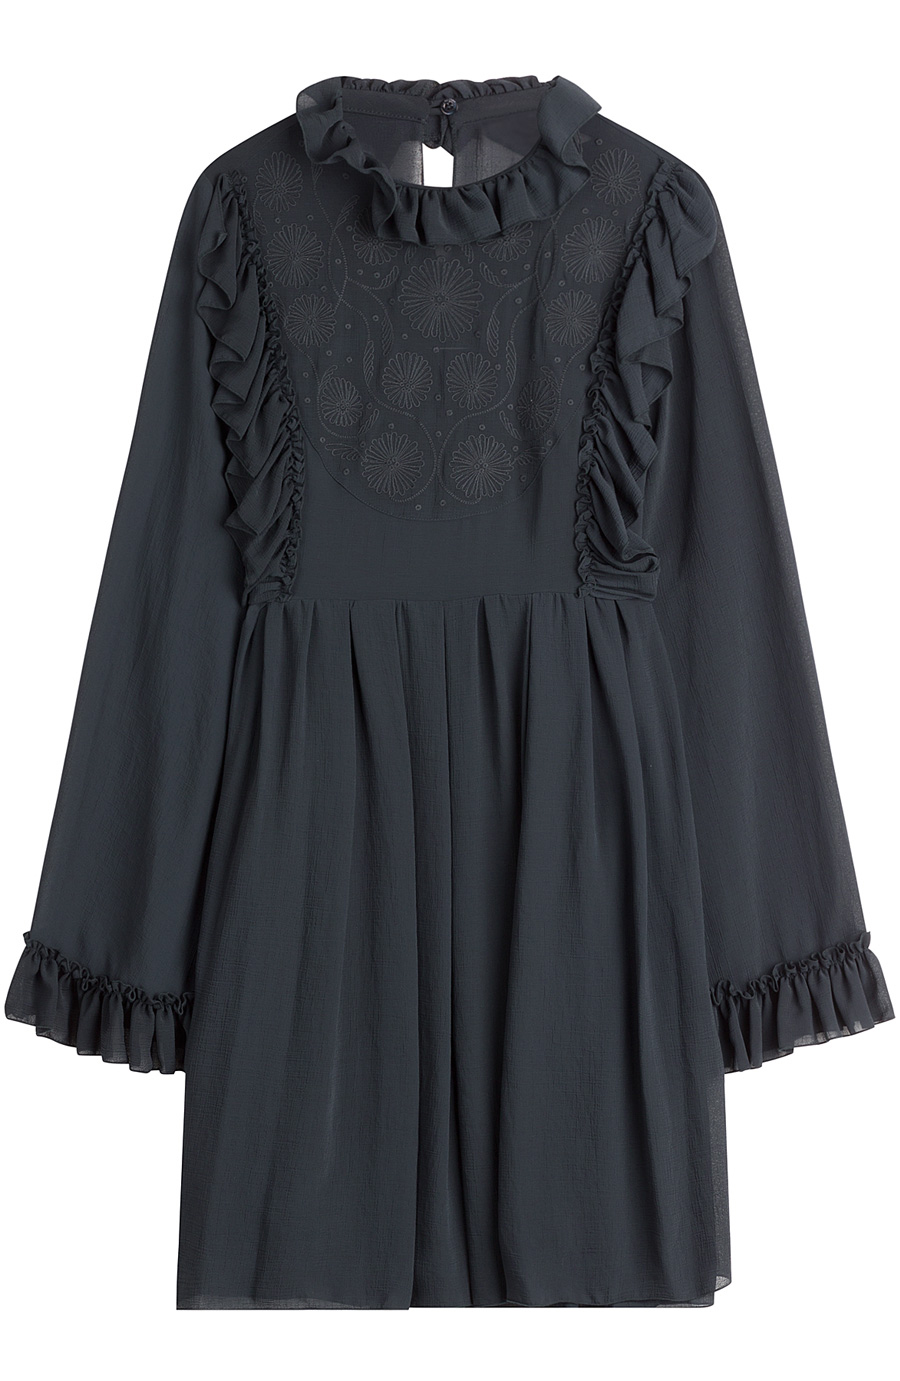 See By Chloé Embroidered Dress With Ruffles | ModeSens